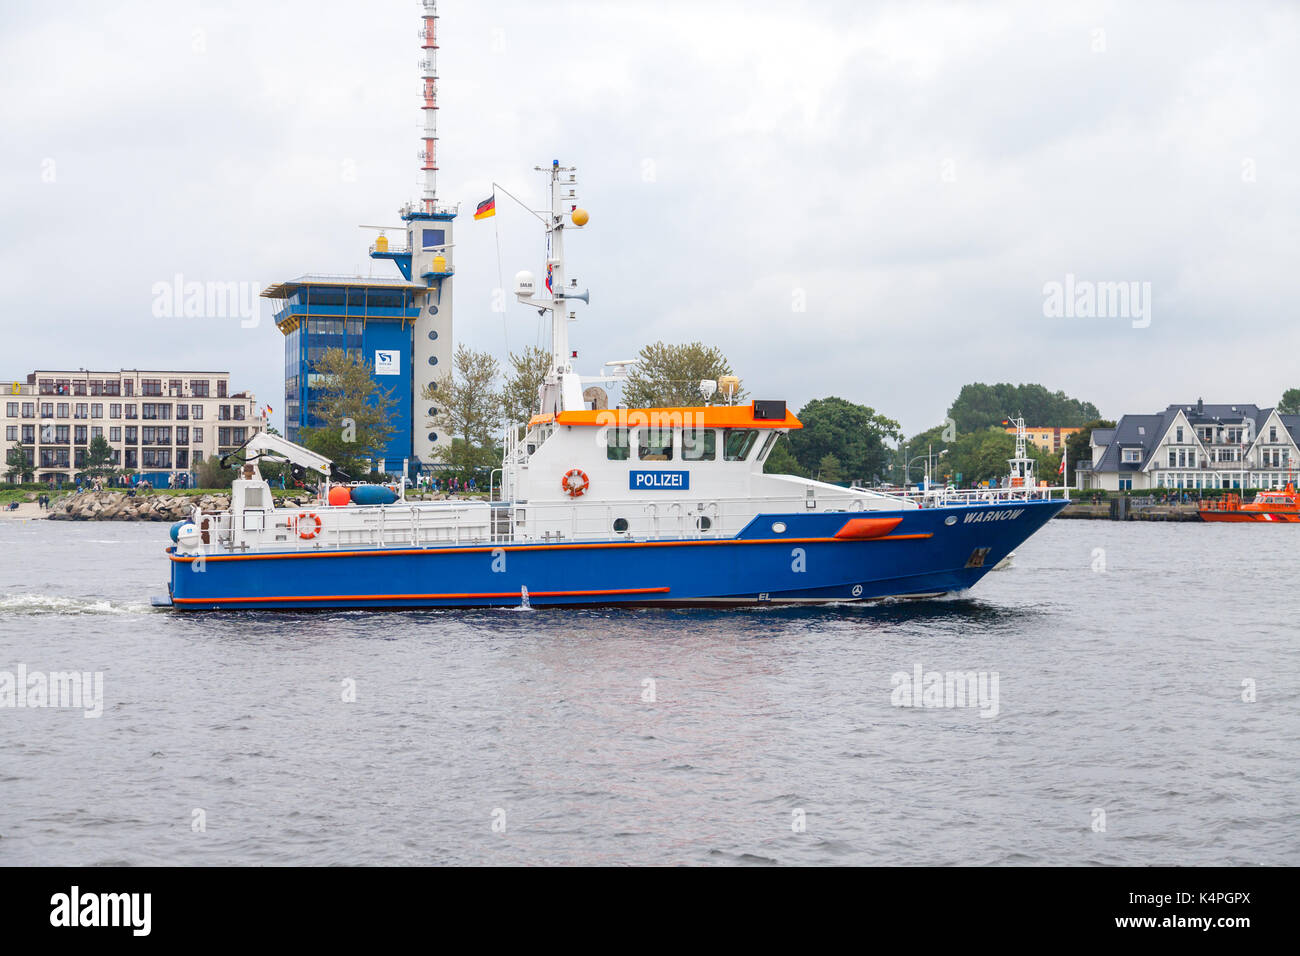 Warnemuende  / Germany - August 12, 2017: german police ship drives at public event hanse sail in warnemuende, germany. Stock Photo